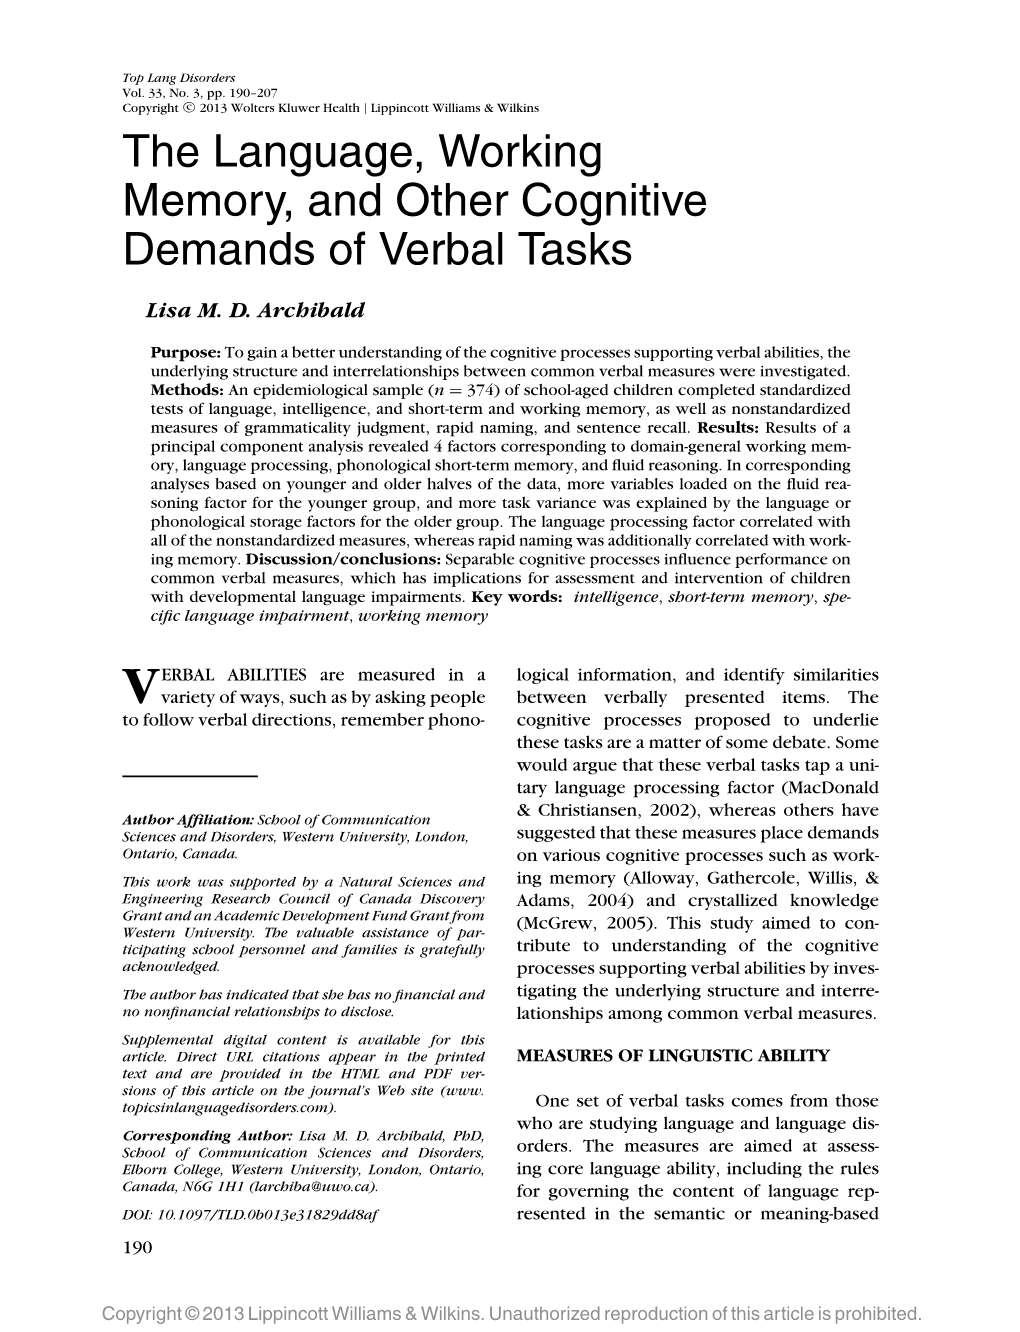 The Language, Working Memory, and Other Cognitive Demands of Verbal Tasks